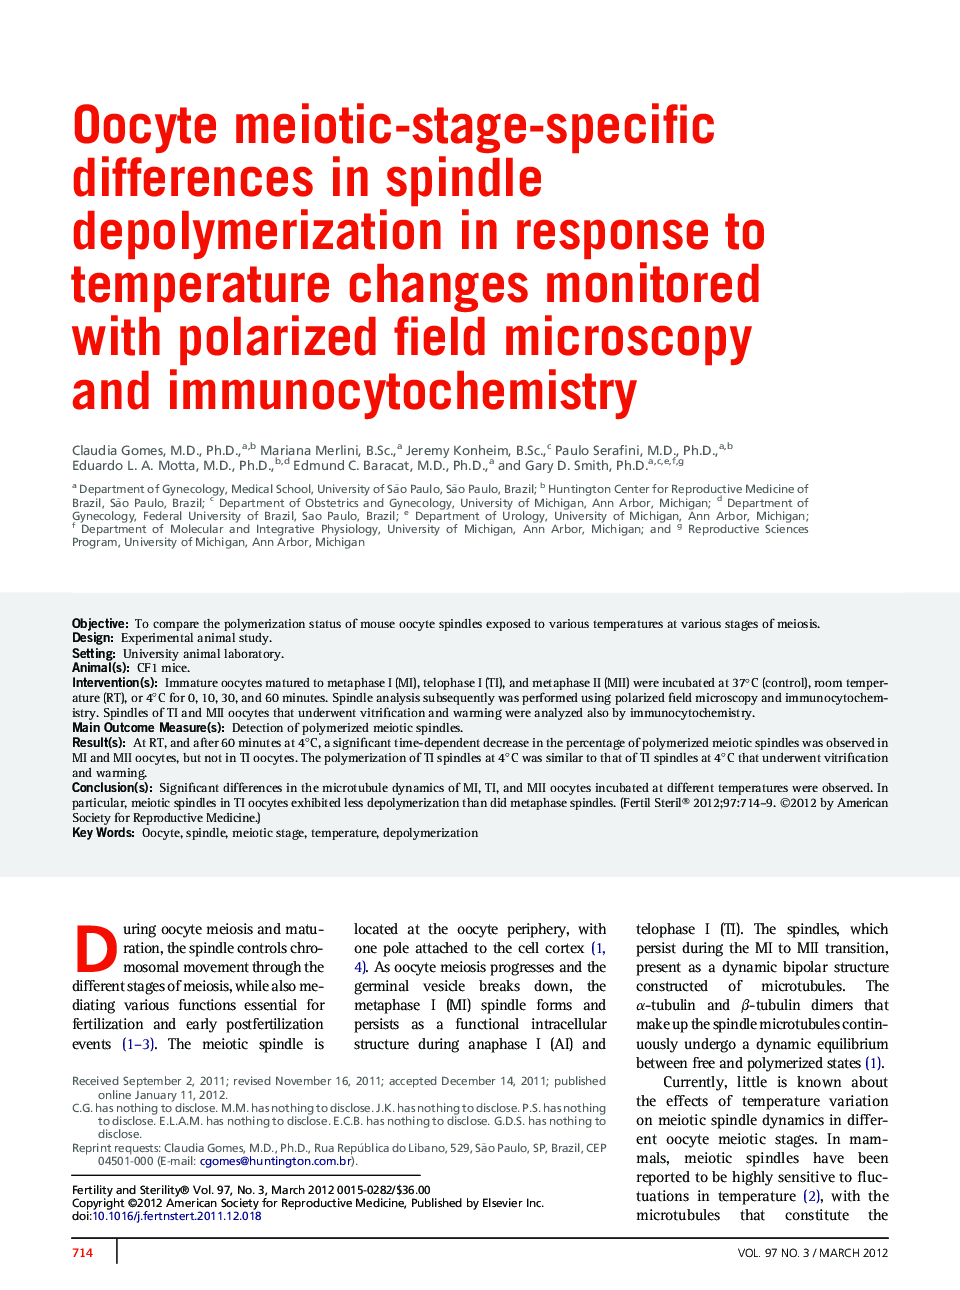 Oocyte meiotic-stage-specific differences in spindle depolymerization in response to temperature changes monitored with polarized field microscopy and immunocytochemistry